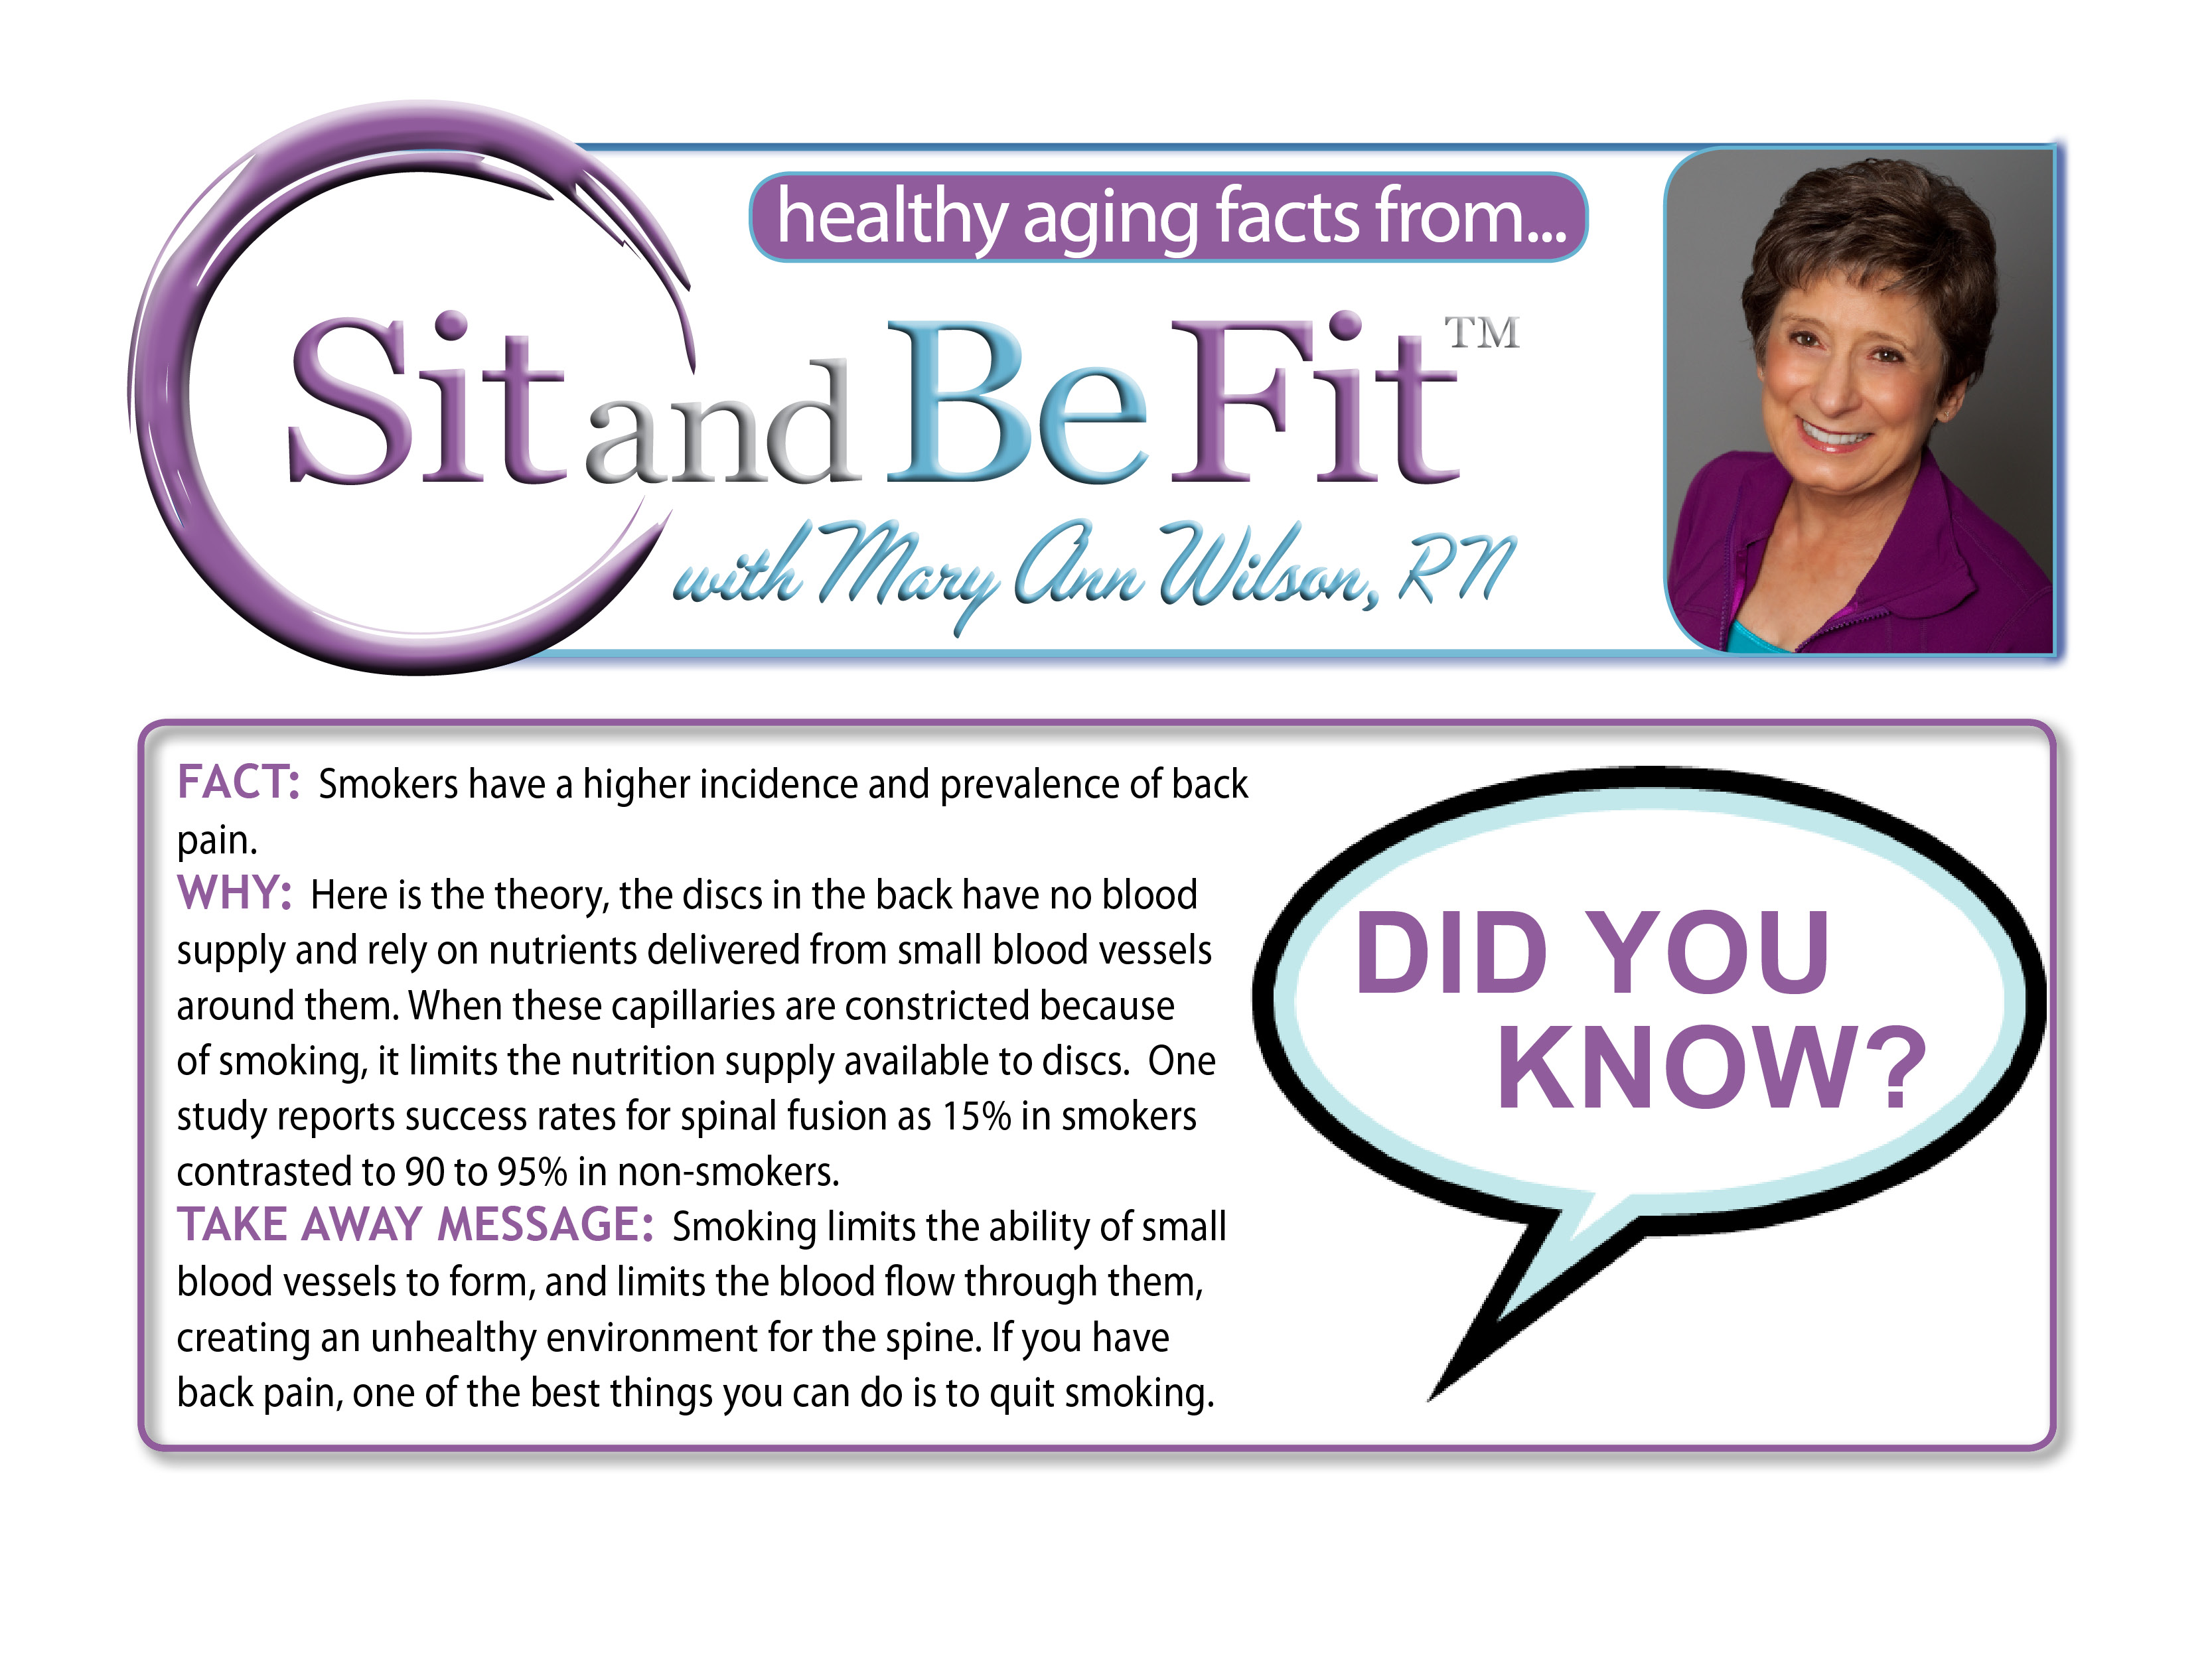 Sit and Be Fit host, Mary Ann Wilson, RN, shares important information about smoking and back pain.